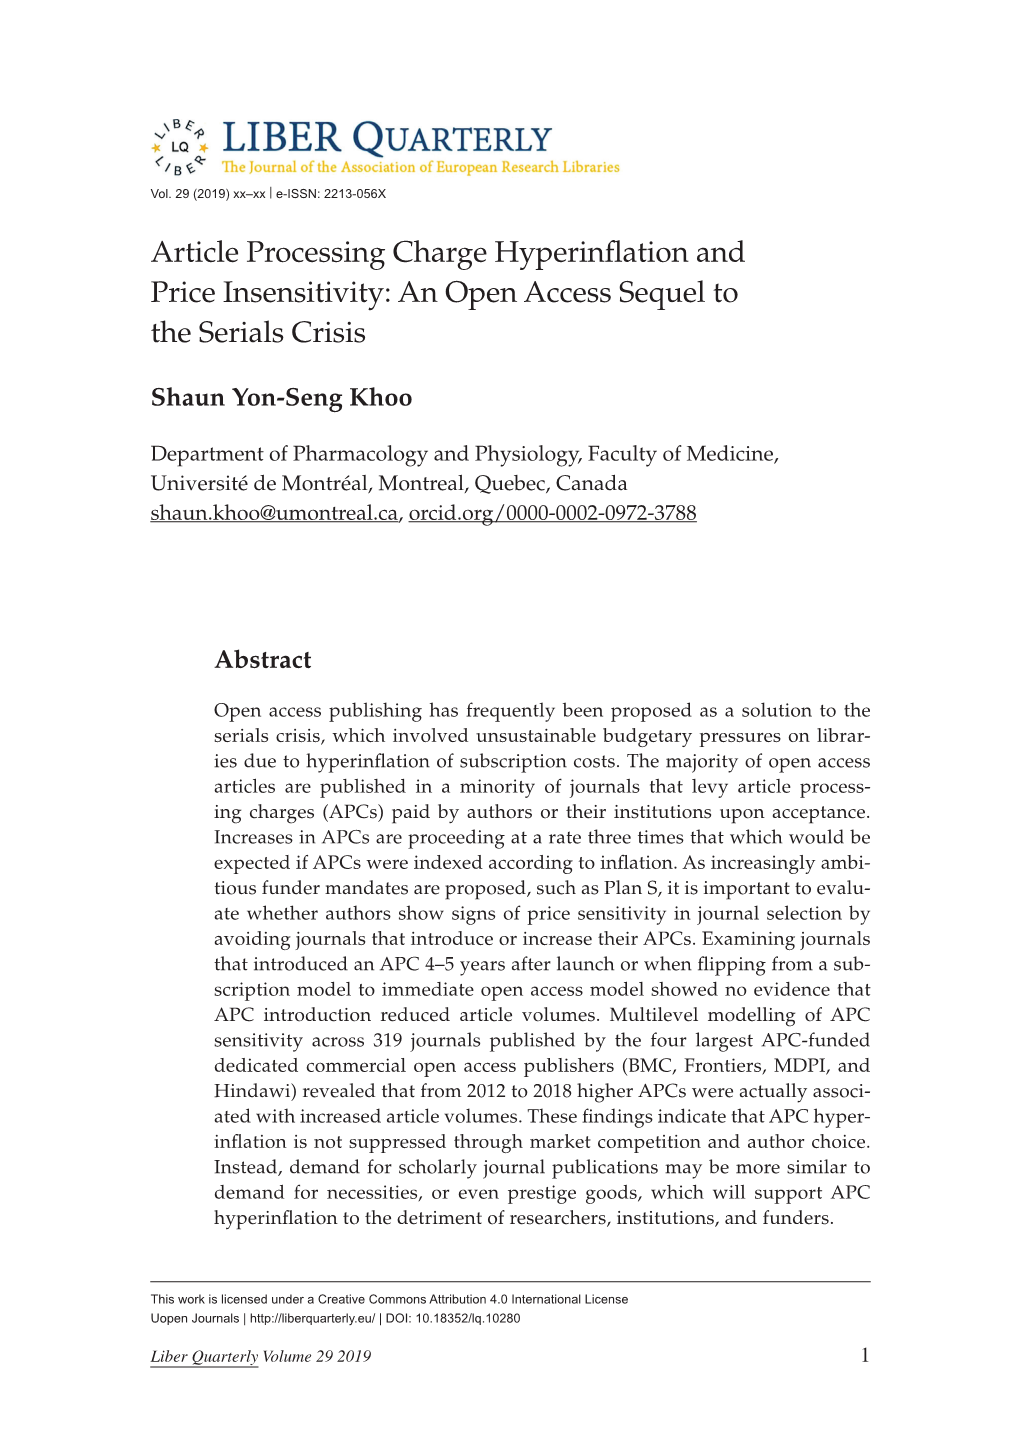 Article Processing Charge Hyperinflation and Price Insensitivity